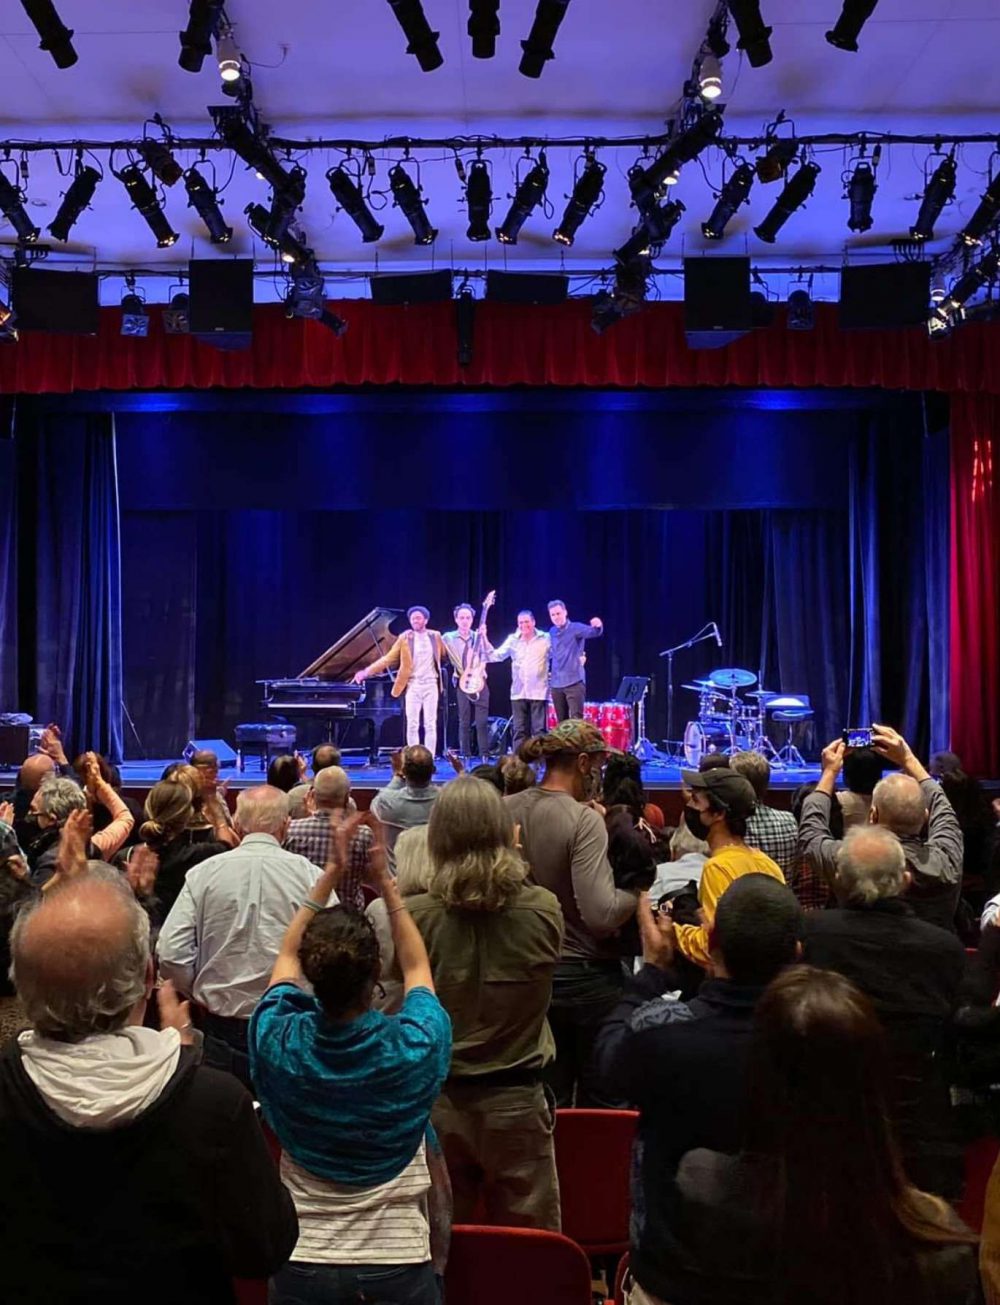 Shot from the back of the performance space, a group of four musicians stand on the stage in a row taking their final bow. They are surrounded by their instruments on a deep blue lit stage and framed with red curtains. The audience stands and claps.